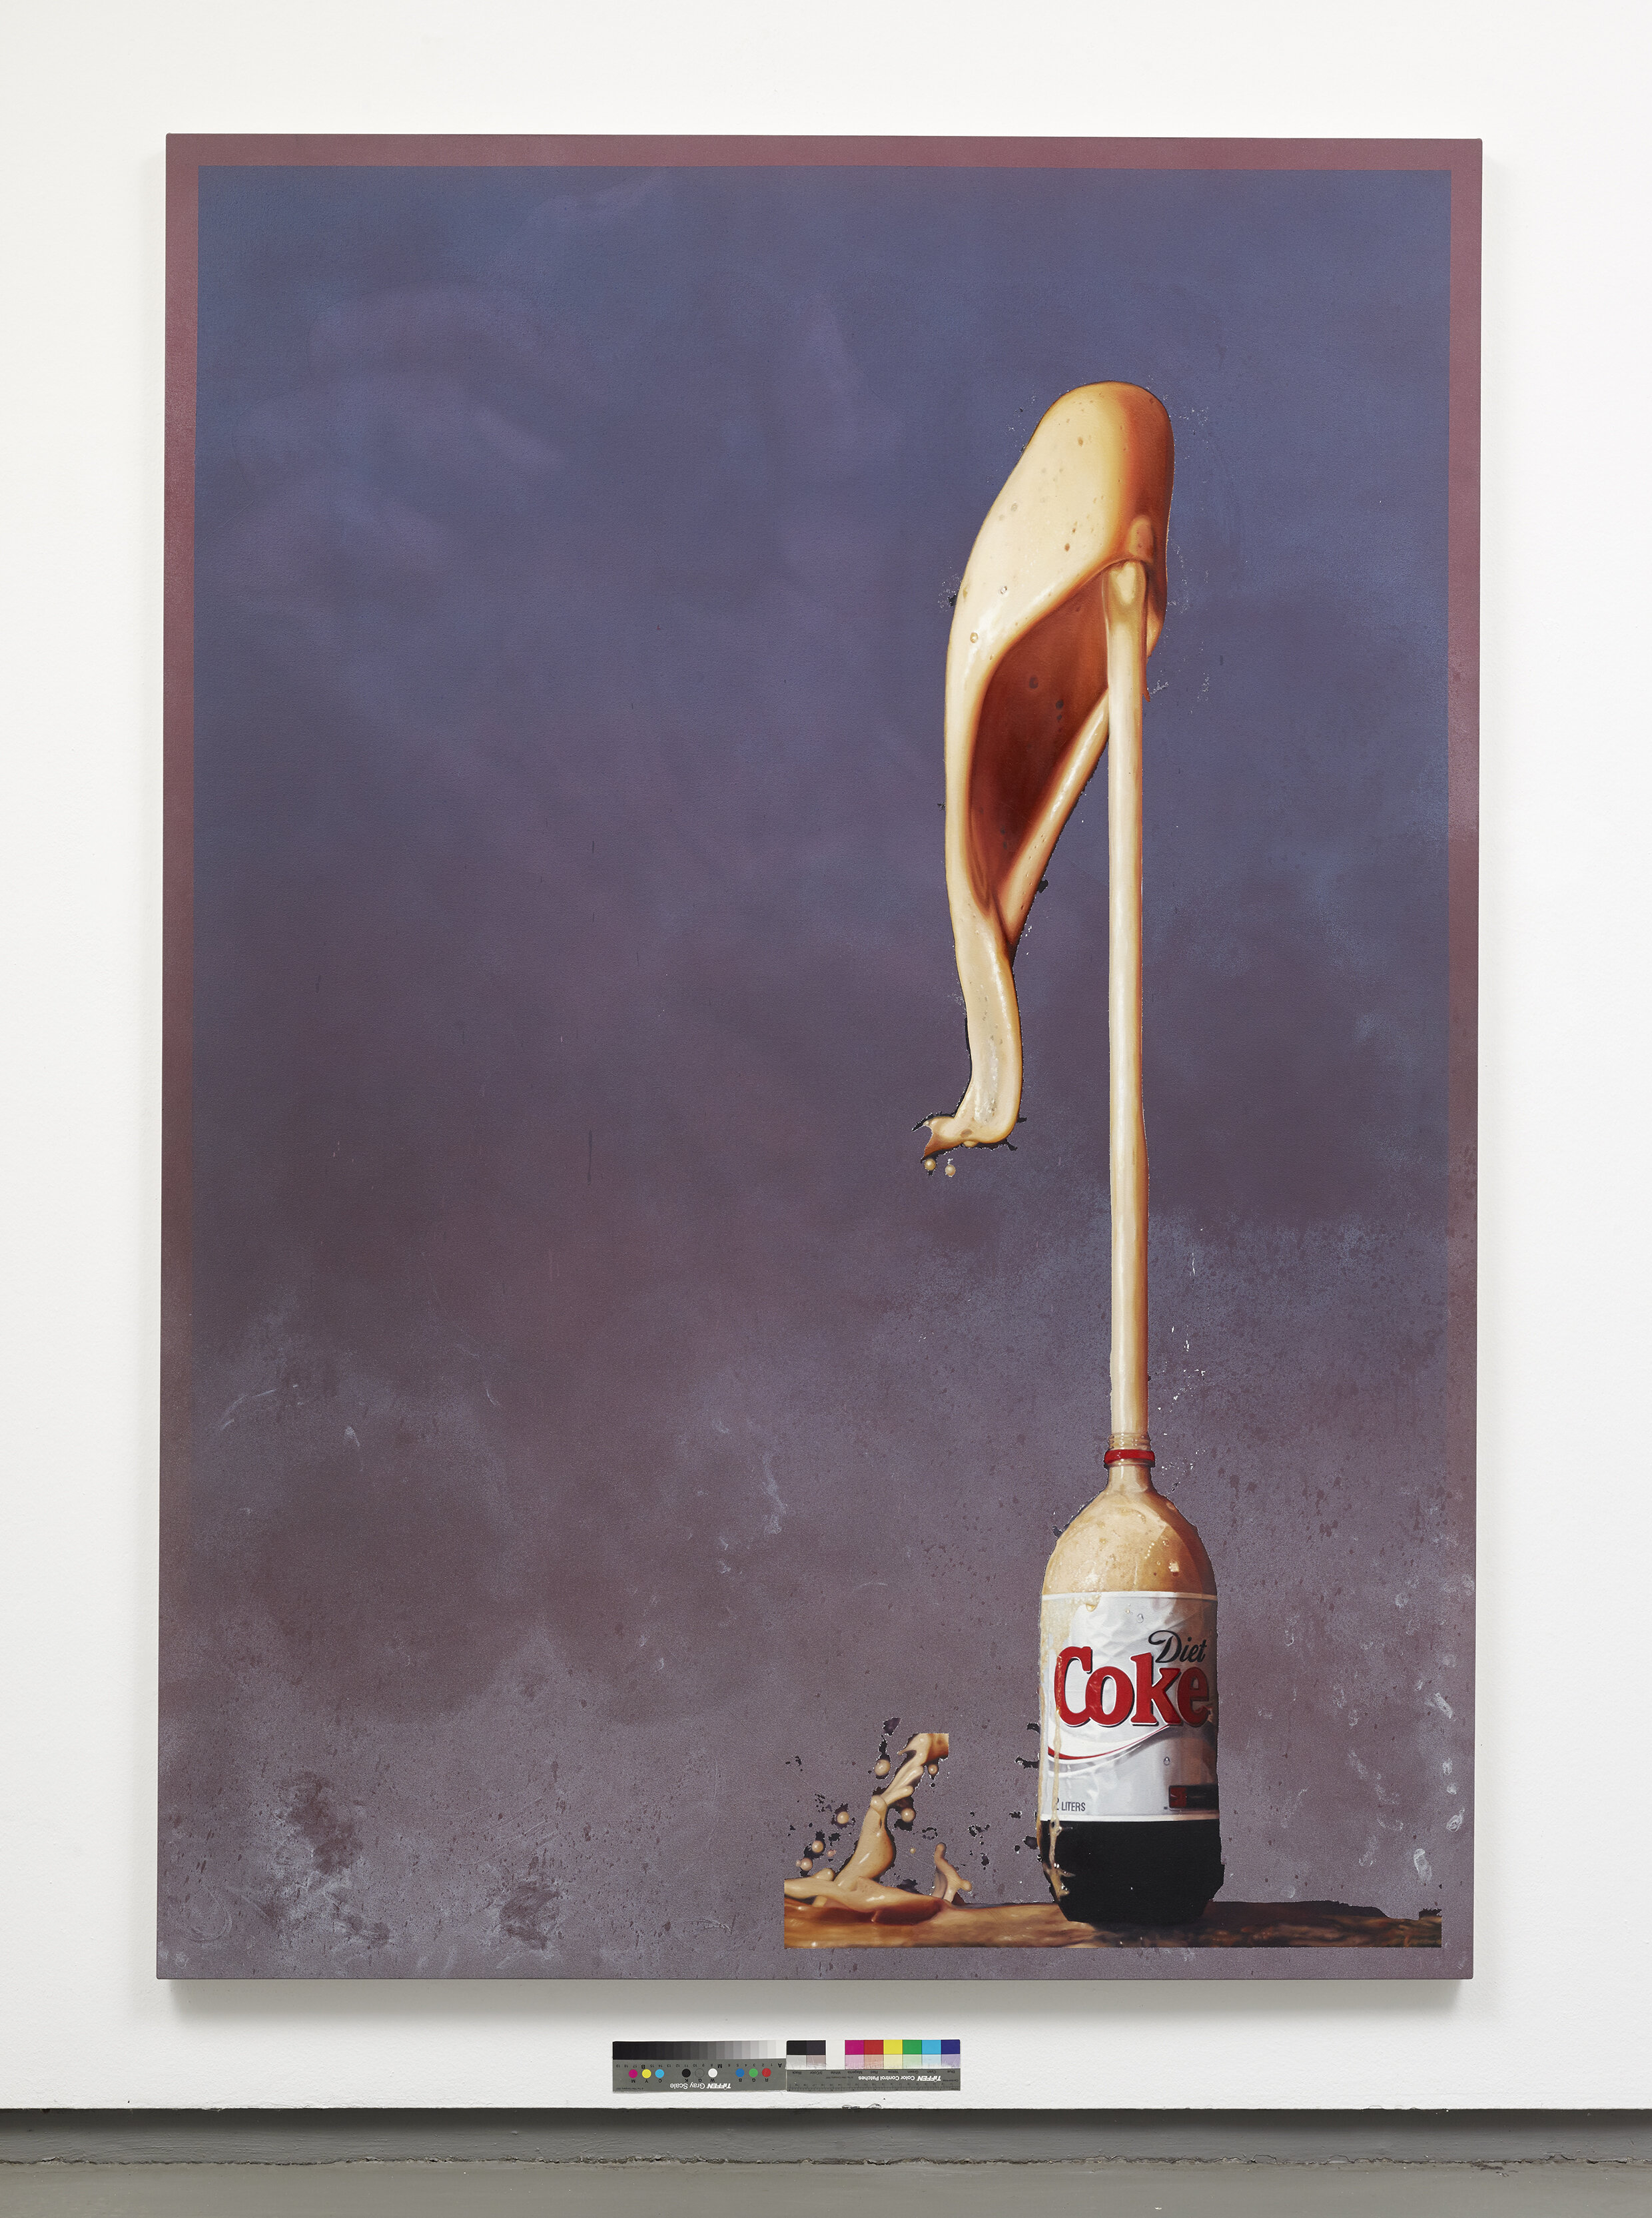   Untitled Painting with Trompe l’Oeil Coke bottle,  2015. Acrylic and oil on canvas. 84 x 60 inches 